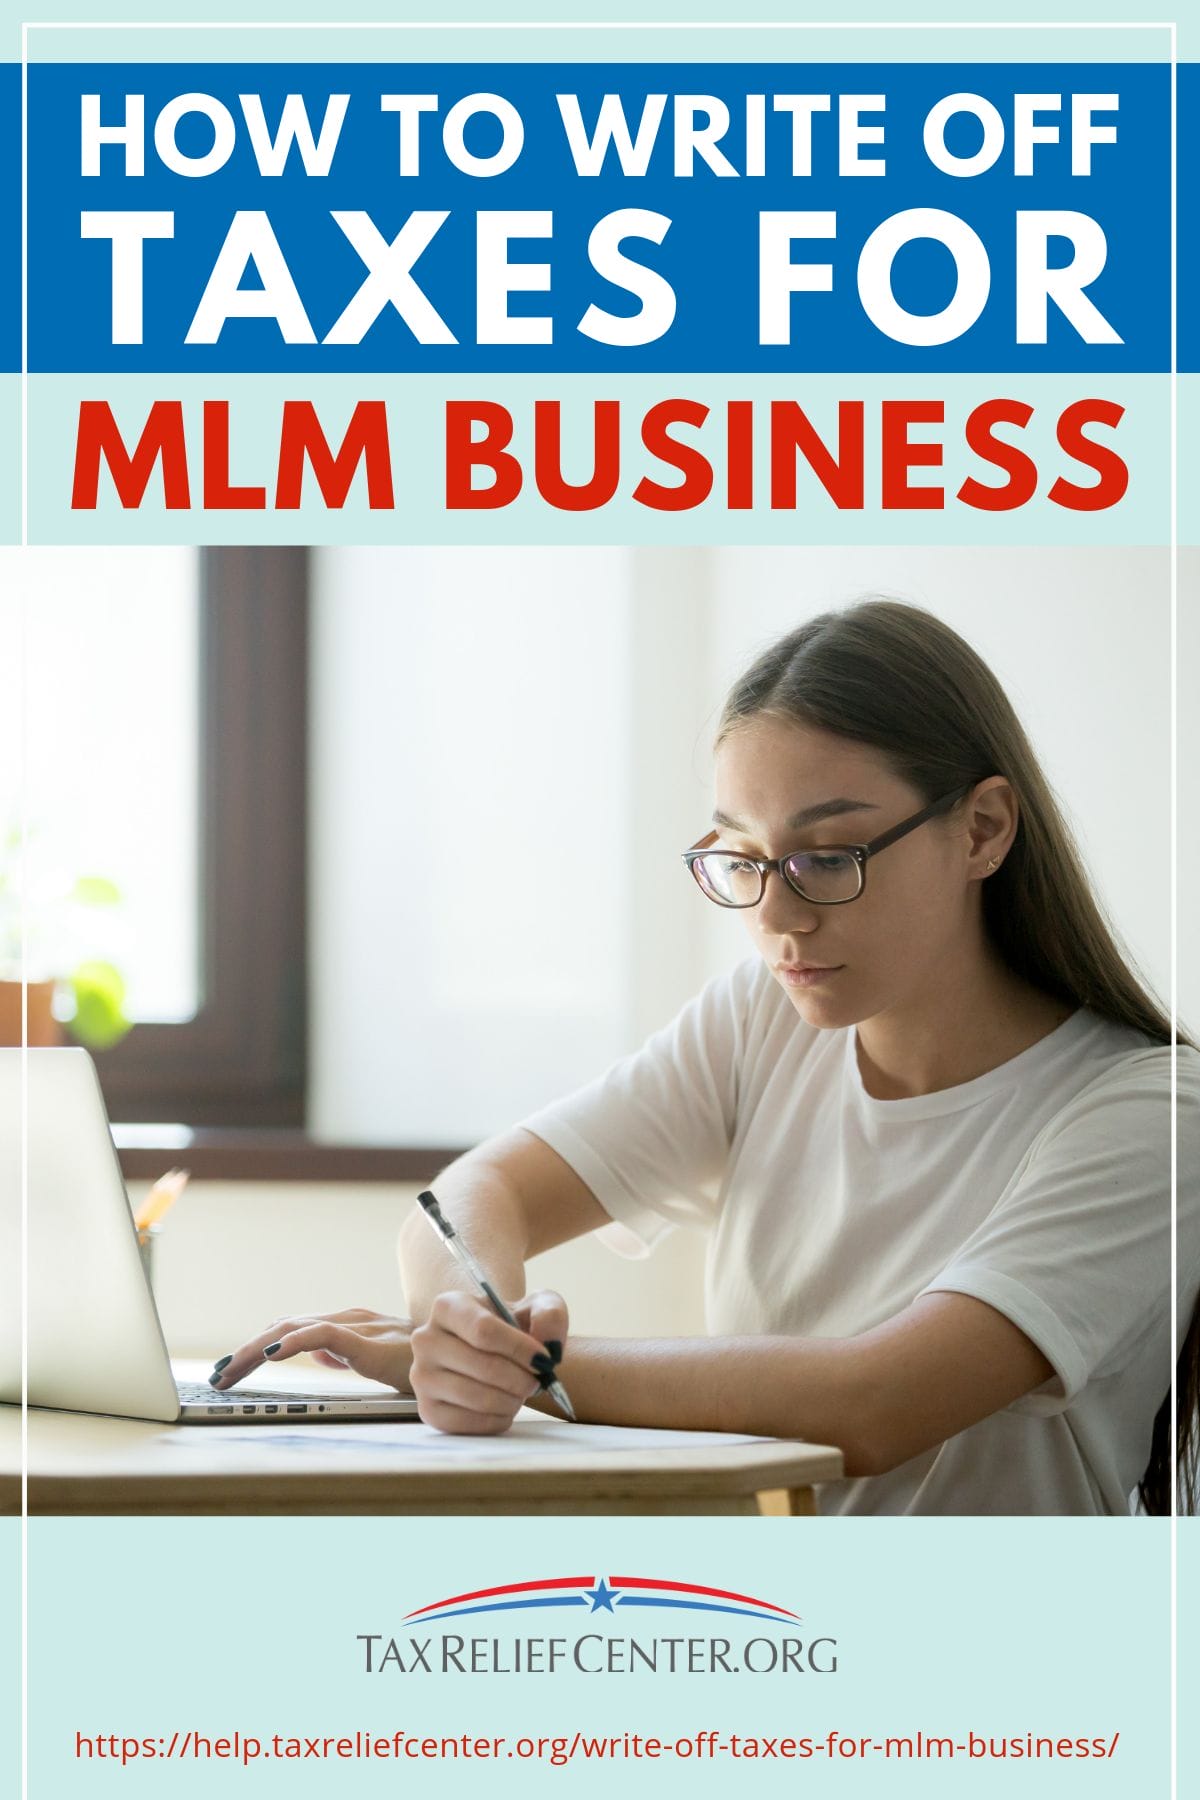 How To Write Off Taxes For MLM Business | Tax Relief Center https://help.taxreliefcenter.org/write-off-taxes-for-mlm-business/